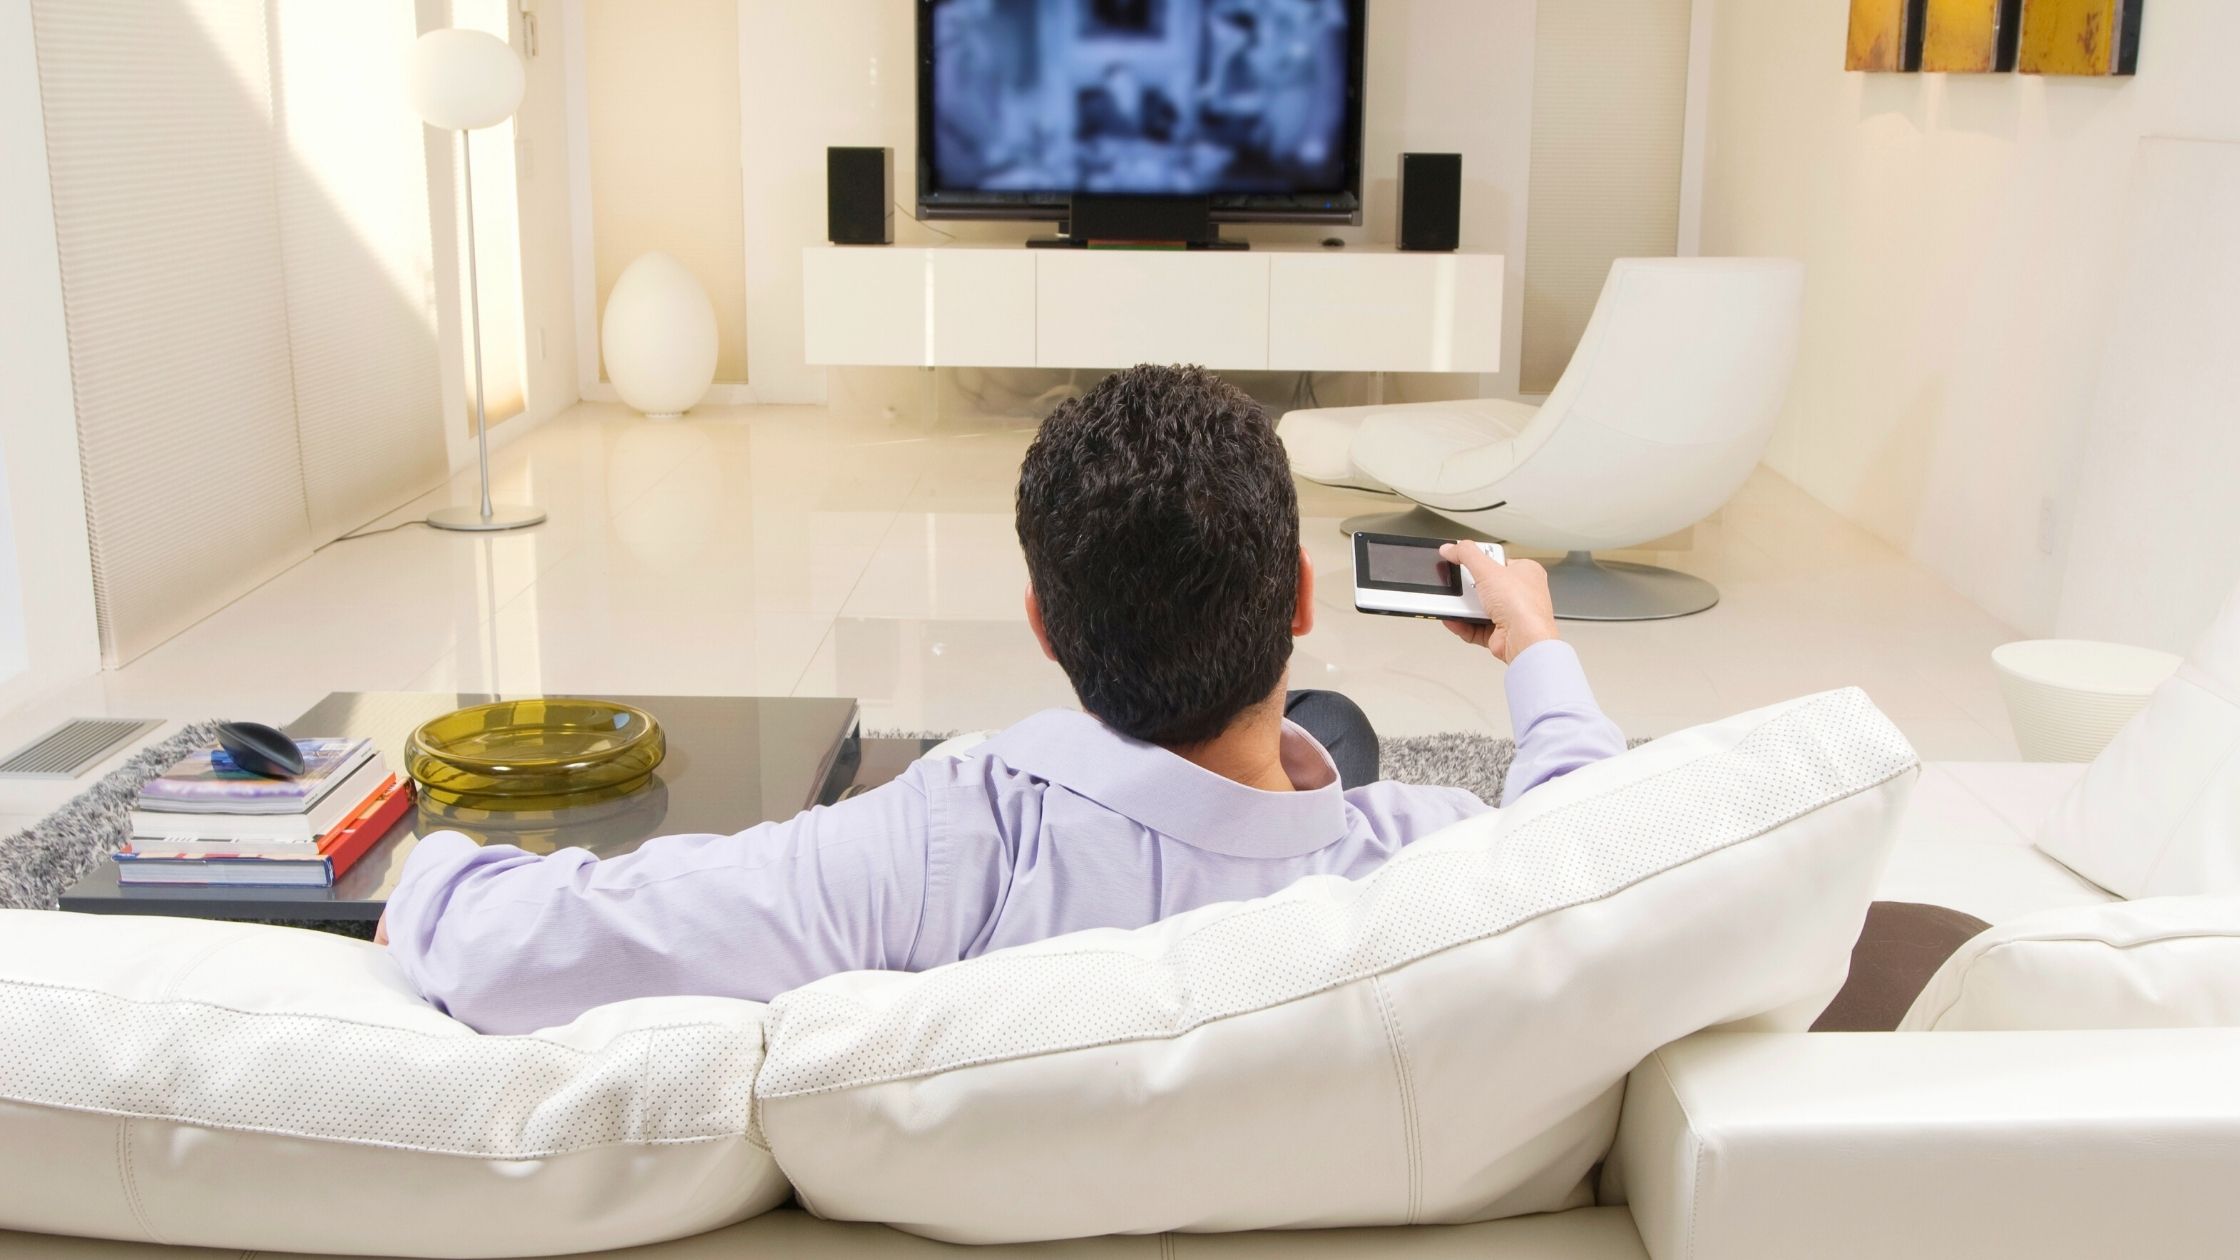 A man sits on a white leather couch, his back faces the camera, he is holding a tv remote and it is pointed at the television